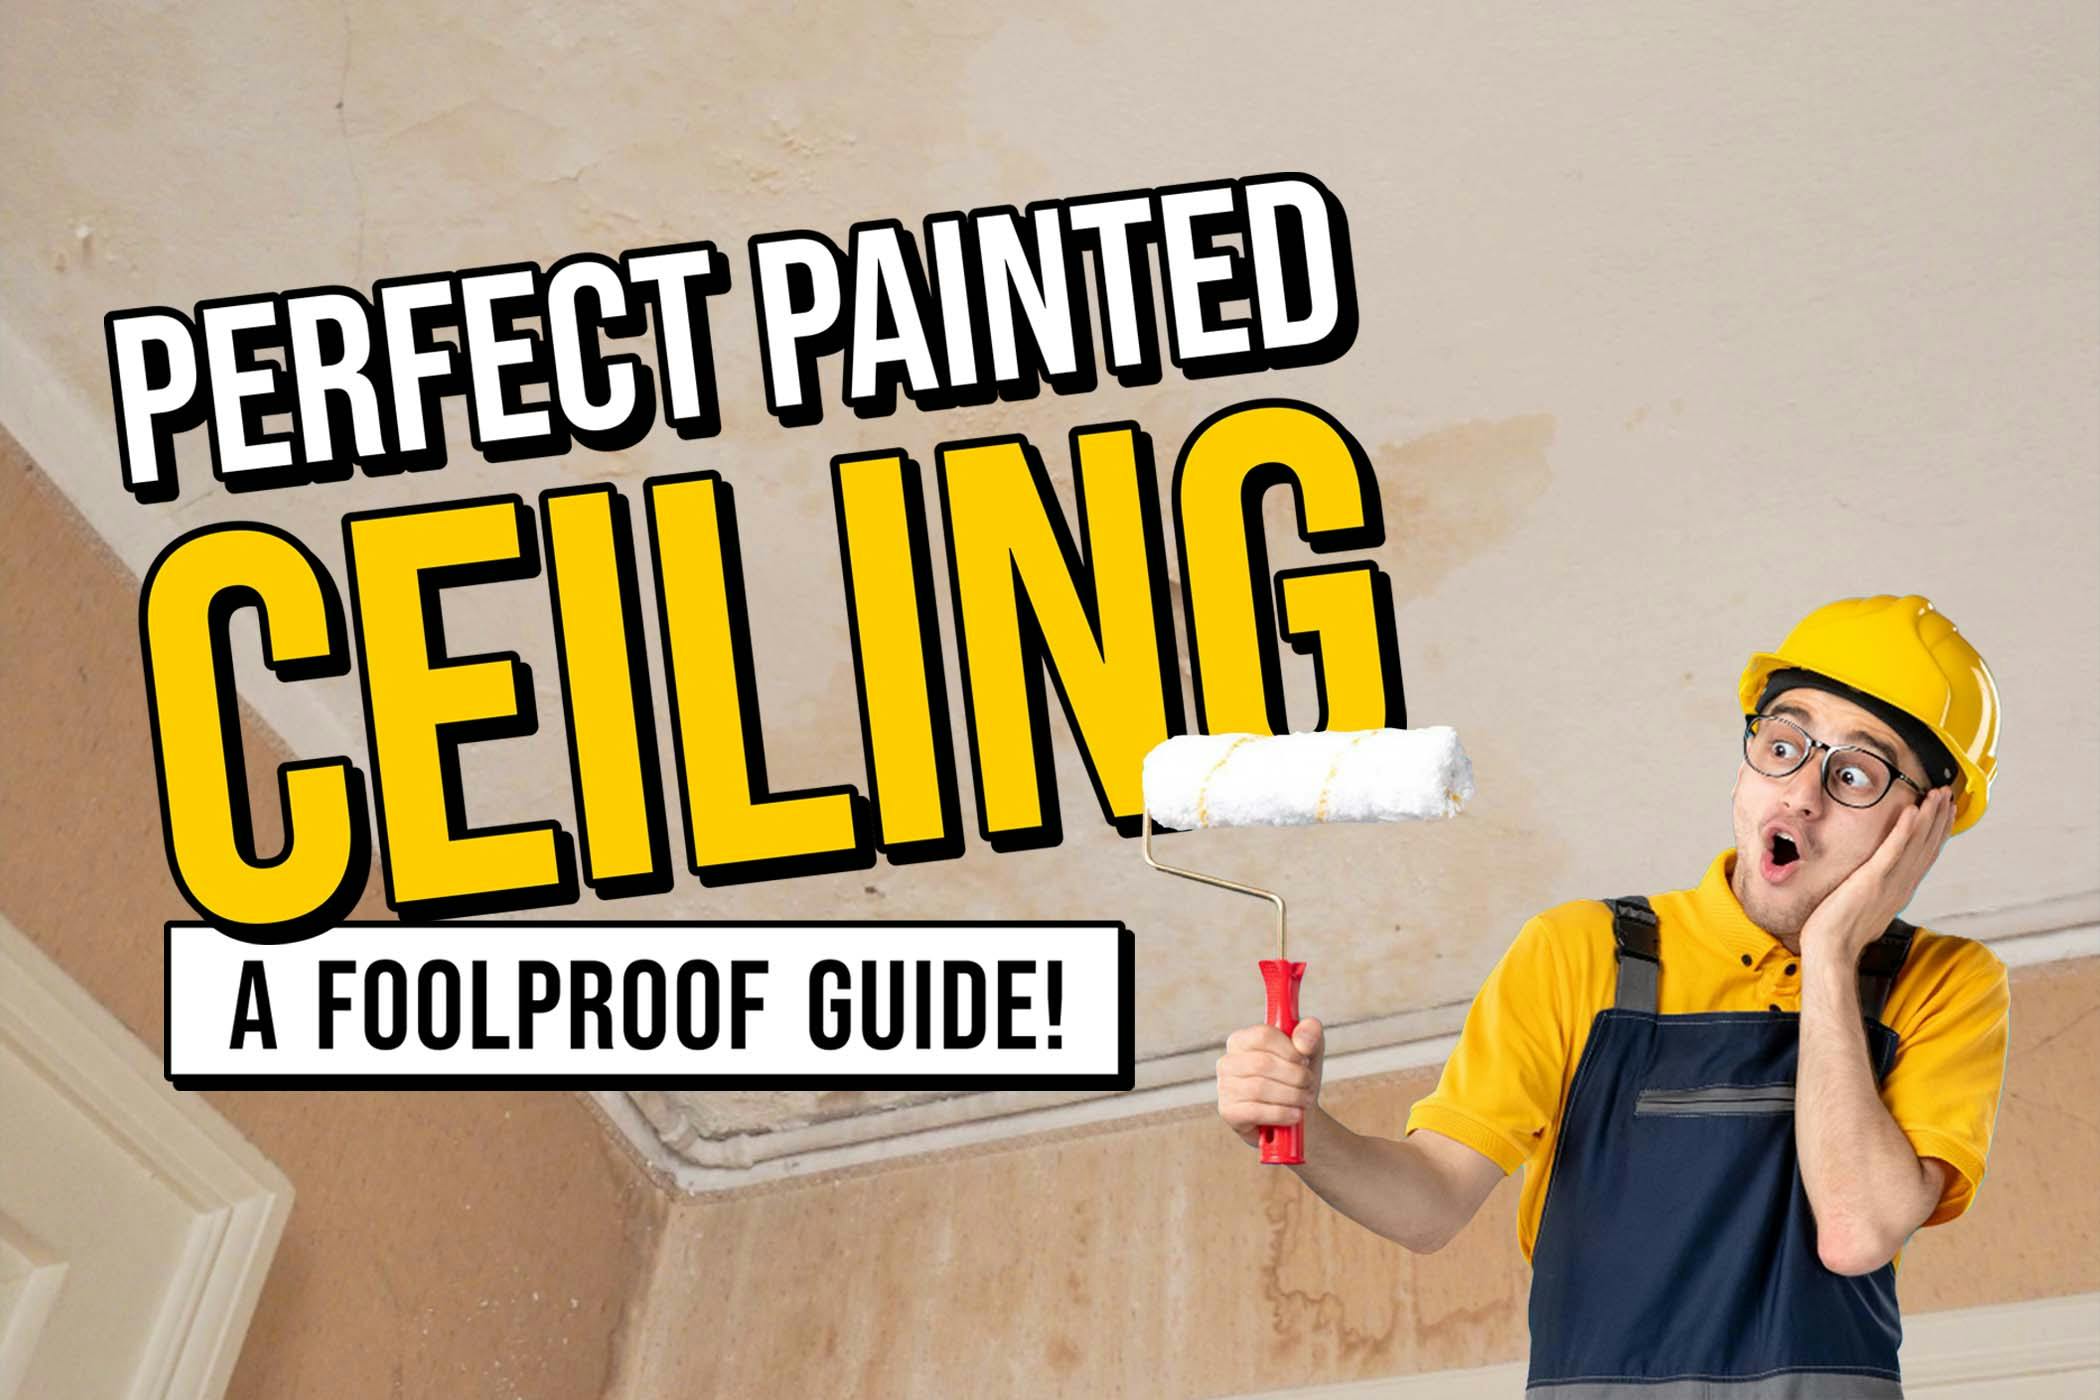 The Paint Points Series: A Foolproof Guide to Perfectly Painted Ceilings